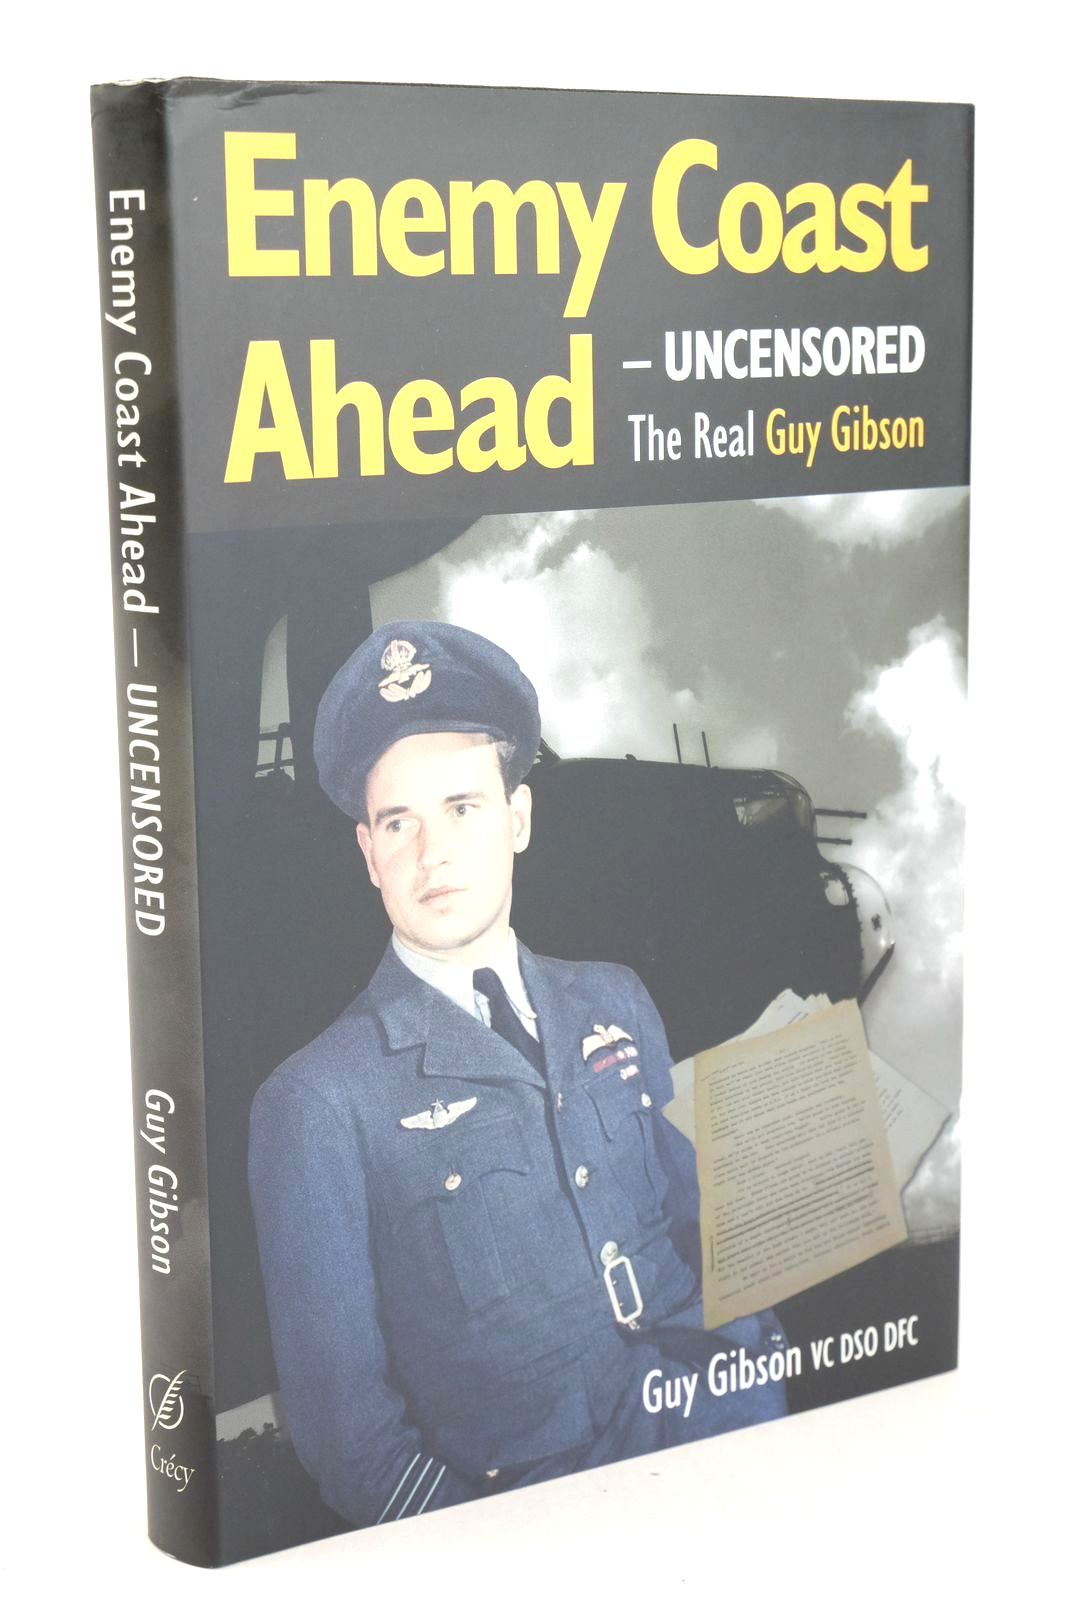 Photo of ENEMY COAST AHEAD - UNCENSORED written by Gibson, Guy published by Crecy Publishing Limited (STOCK CODE: 1325571)  for sale by Stella & Rose's Books